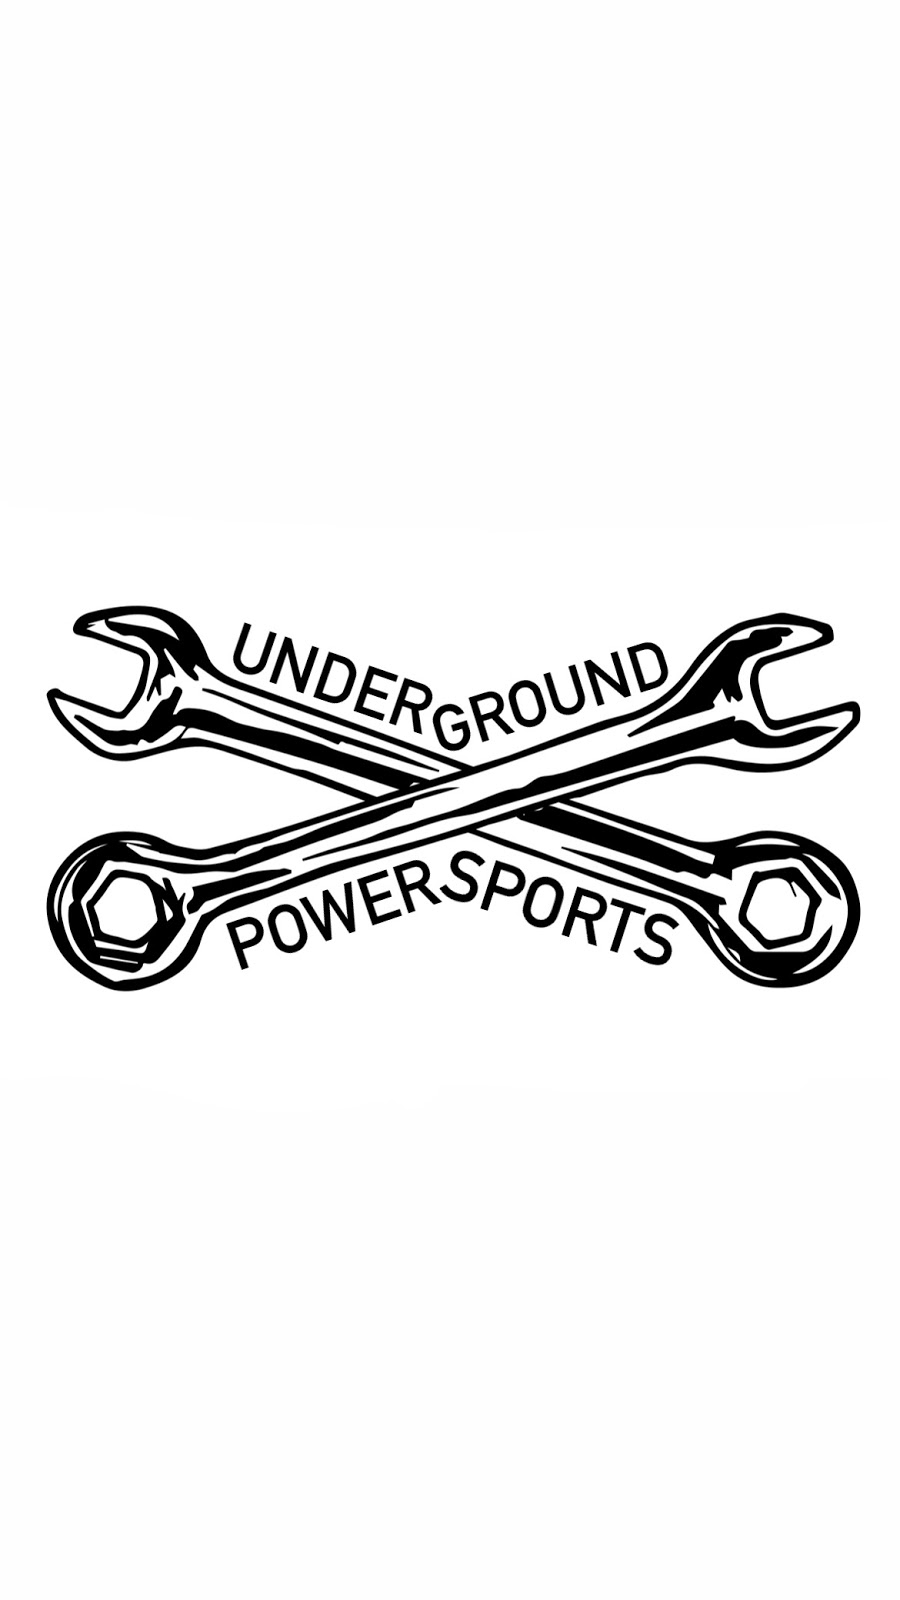 Underground Powersports | Please Call and Inquire, Stockholm, NJ 07460, USA | Phone: (973) 750-8373